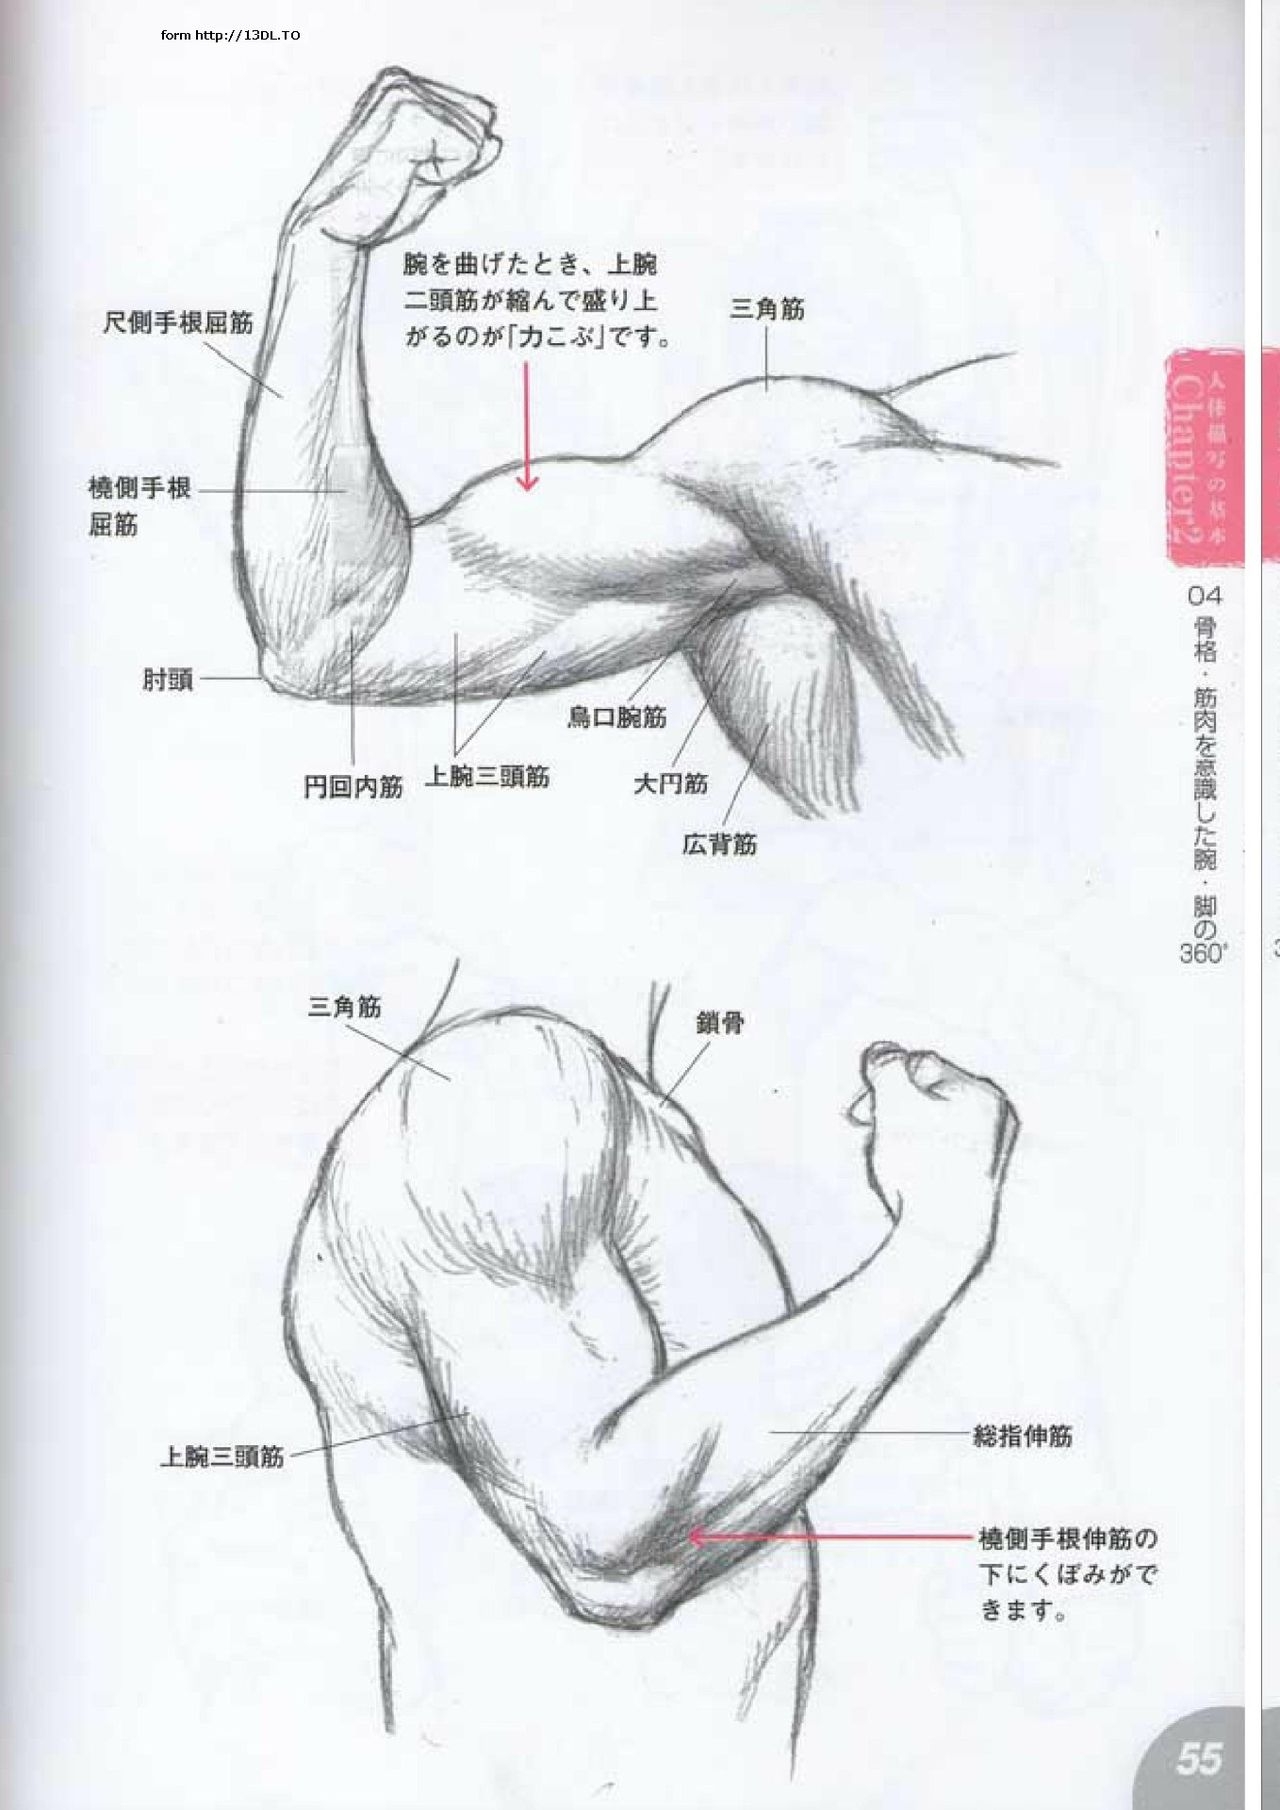 How to draw a character drawing from a human anatomical chart 53